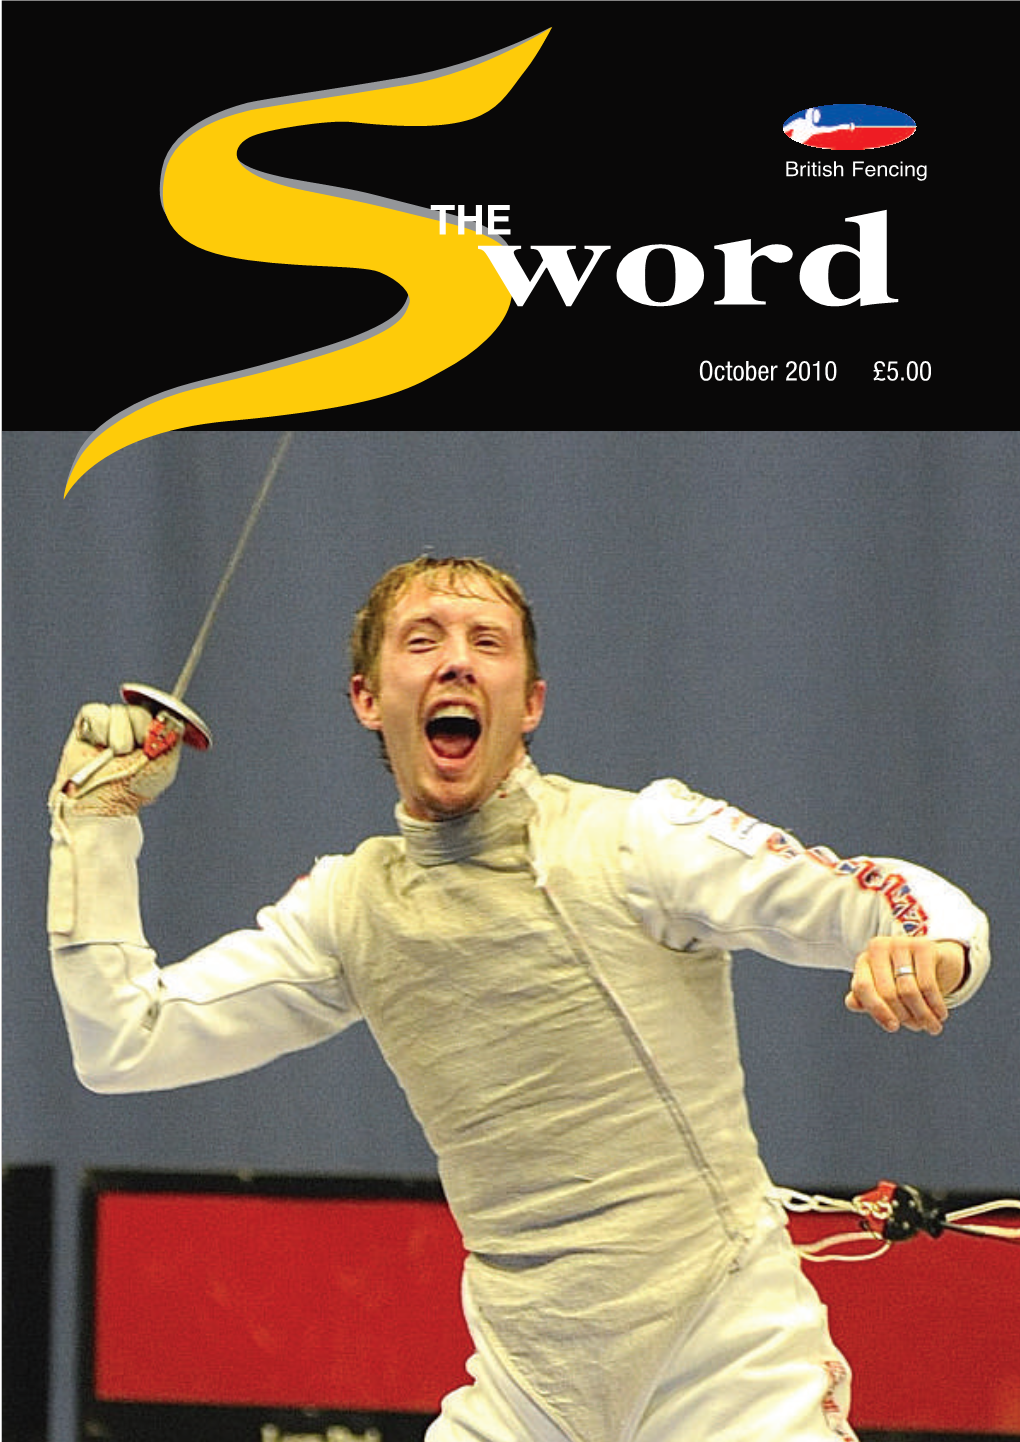 October 2010 £5.00 9700 SWORD OCTOBER USE!:April Issue 8/10/10 05:53 Page 2 9700 SWORD OCTOBER USE!:April Issue 8/10/10 05:53 Page 3